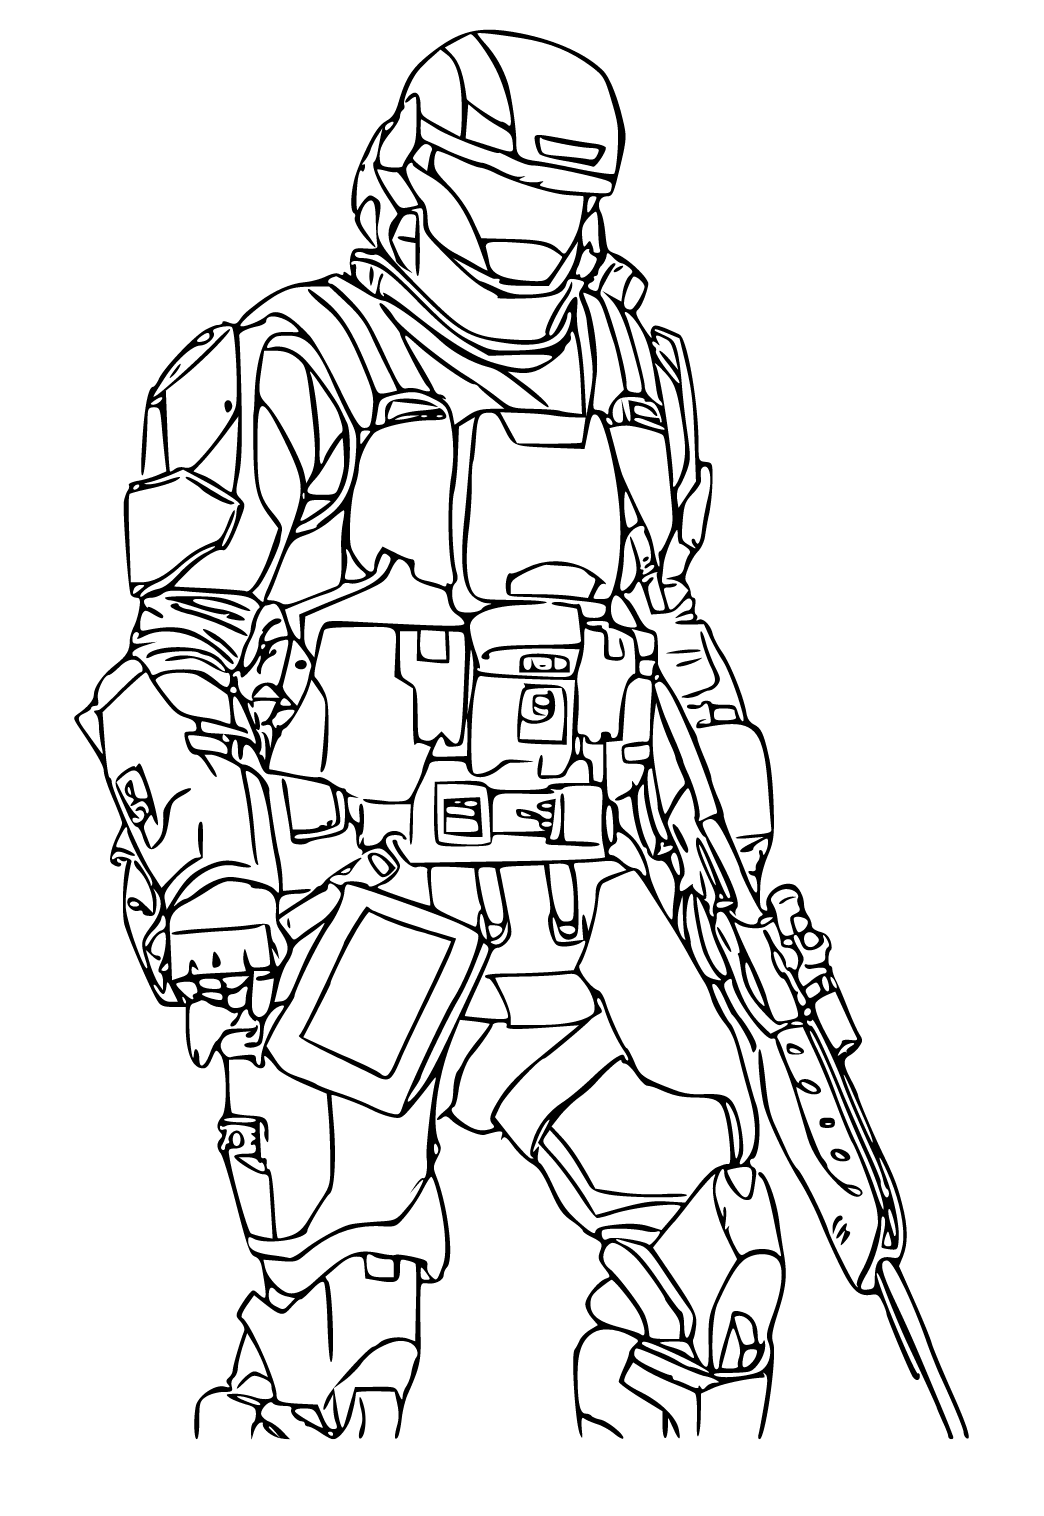 Free Printable Halo Weapon Coloring Page for Adults and Kids - Lystok.com